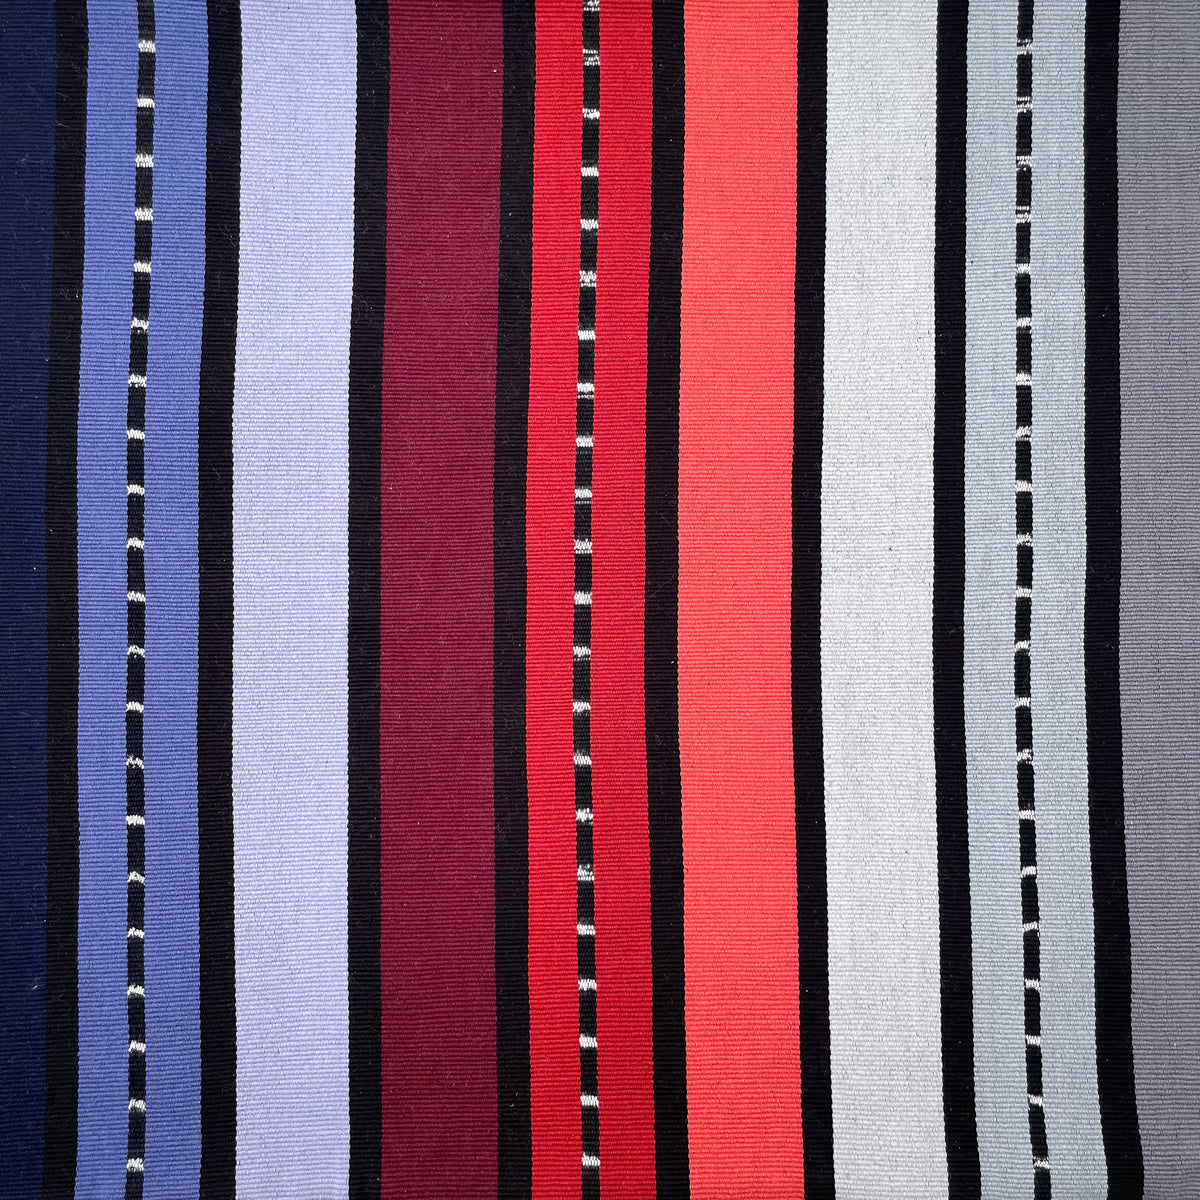 Closeup swatch of cushion cover with colorful stripes grading from black, purple, red, to grey, with accent stripes in black and white jaspe